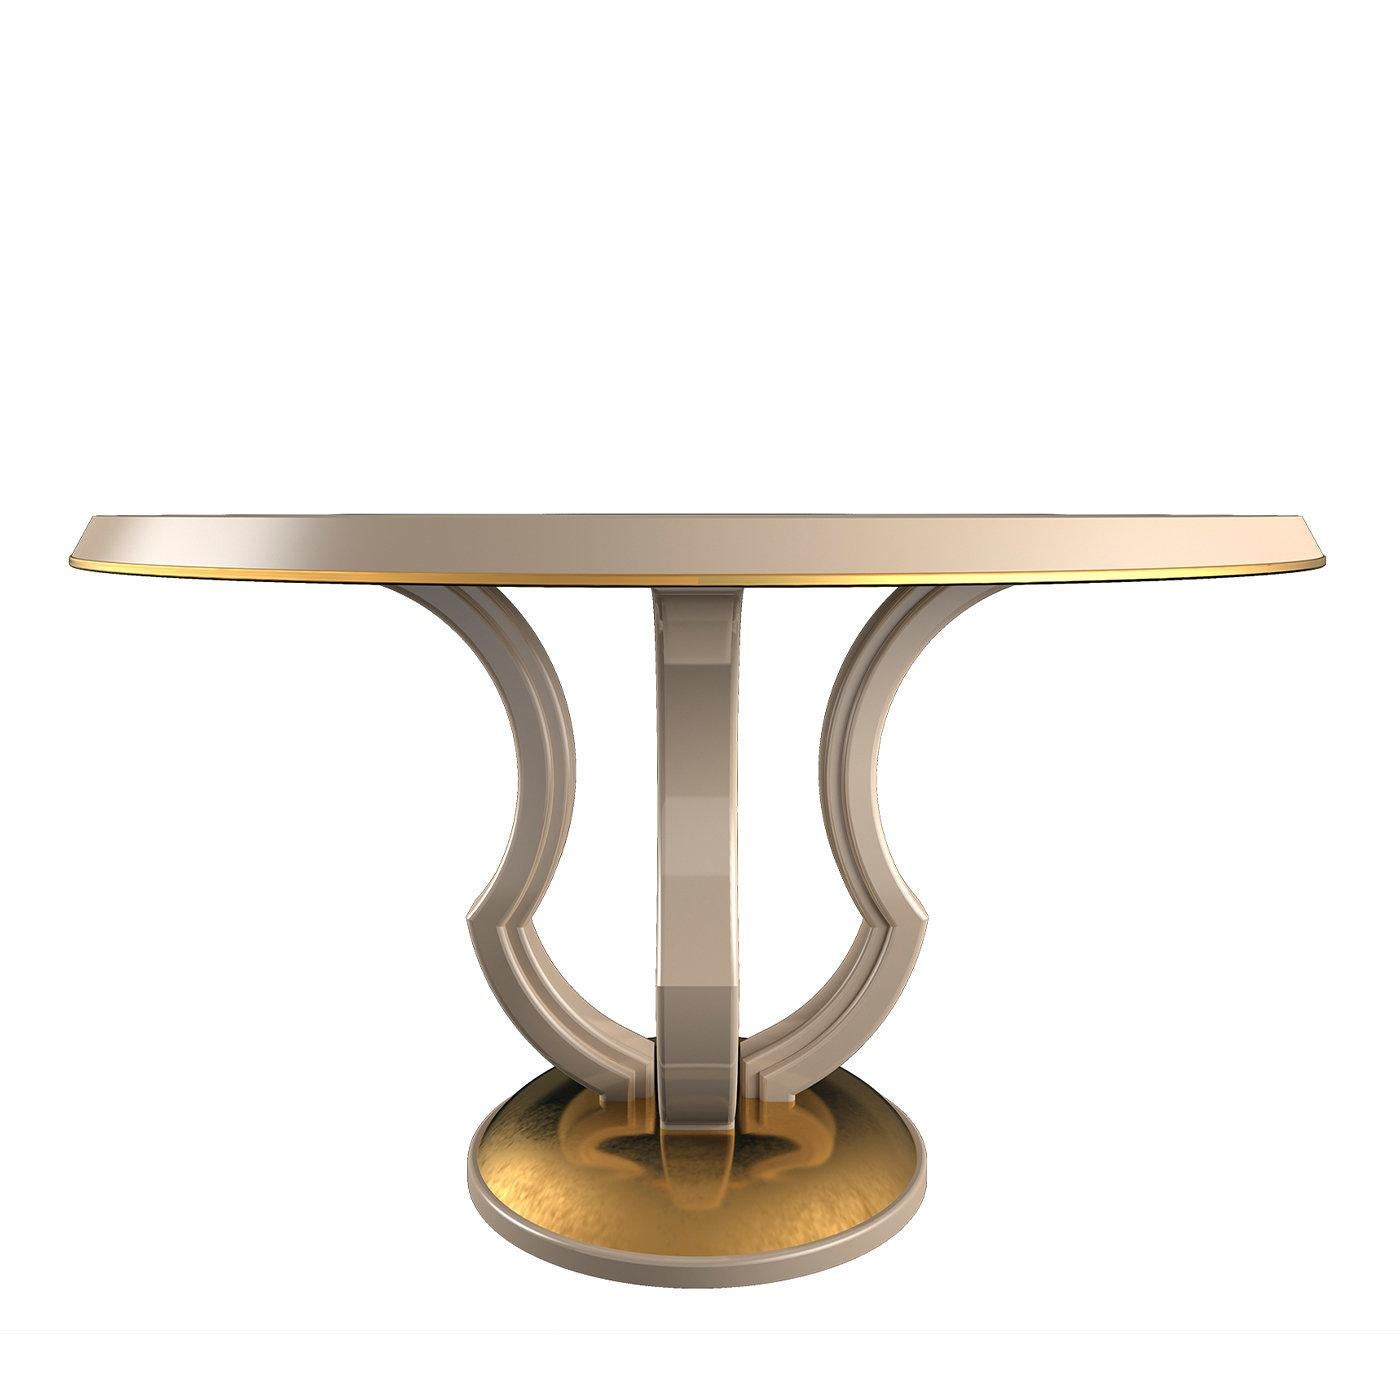 Inspired by the sinuous and distinctive shape of a Lotus flower, a symbol of rebirth and spiritual enlightenment, this gorgeous dining table by Hanno Giesler will create a luminous and refined focal point in an elegant interior. Crated of wood